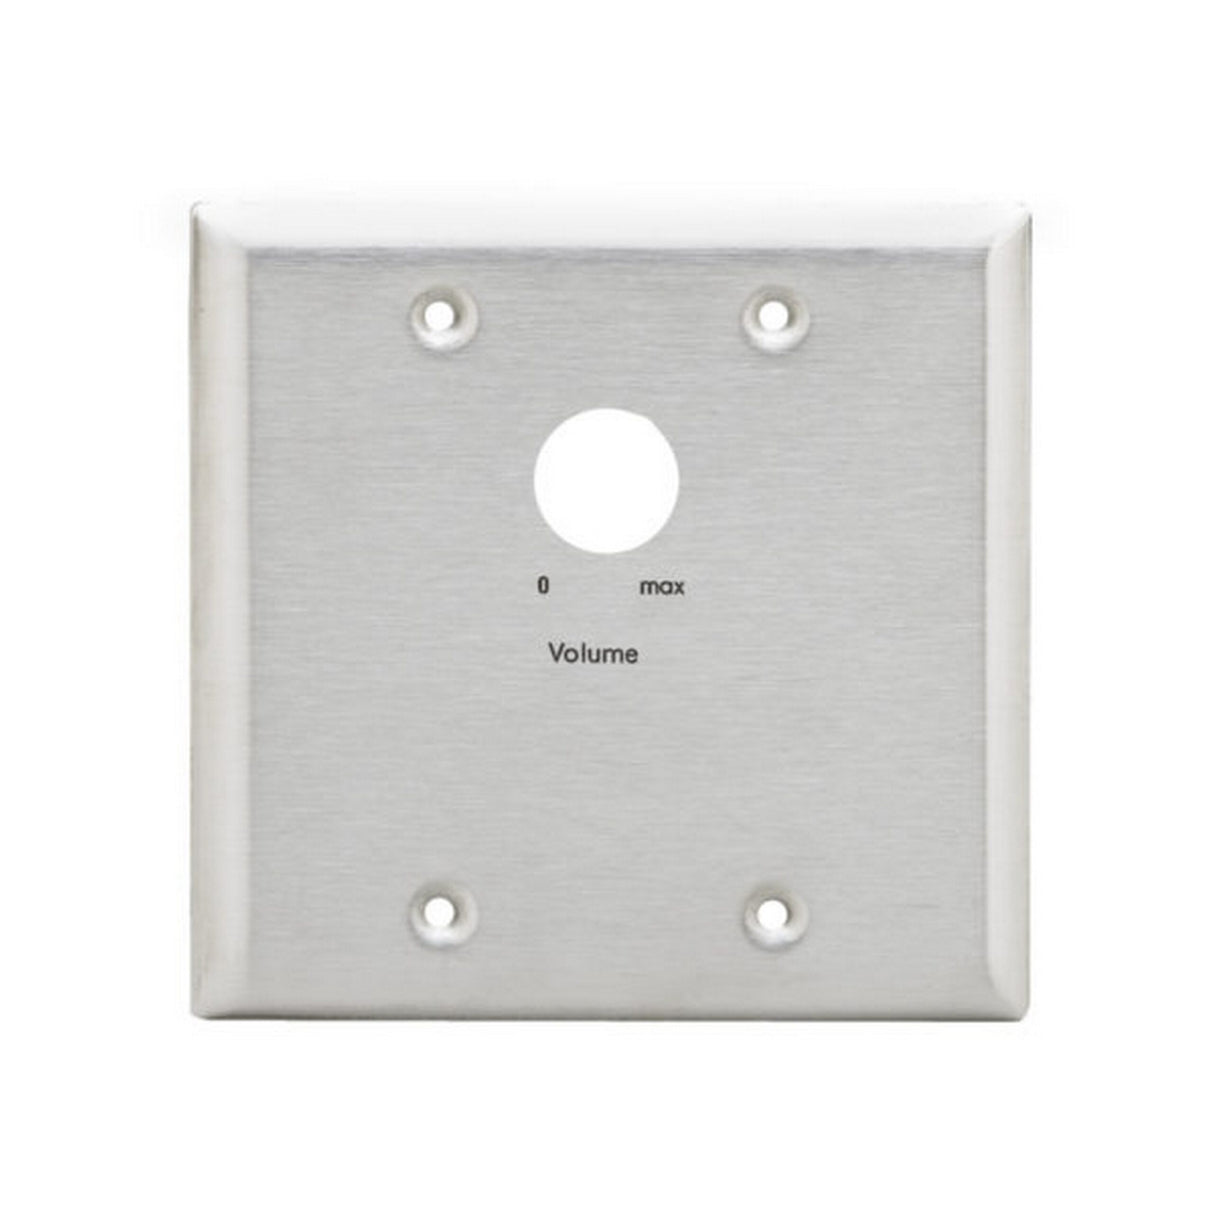 Lowell KL-ANP2 2-Gang Stainless Steel Adapter Plate